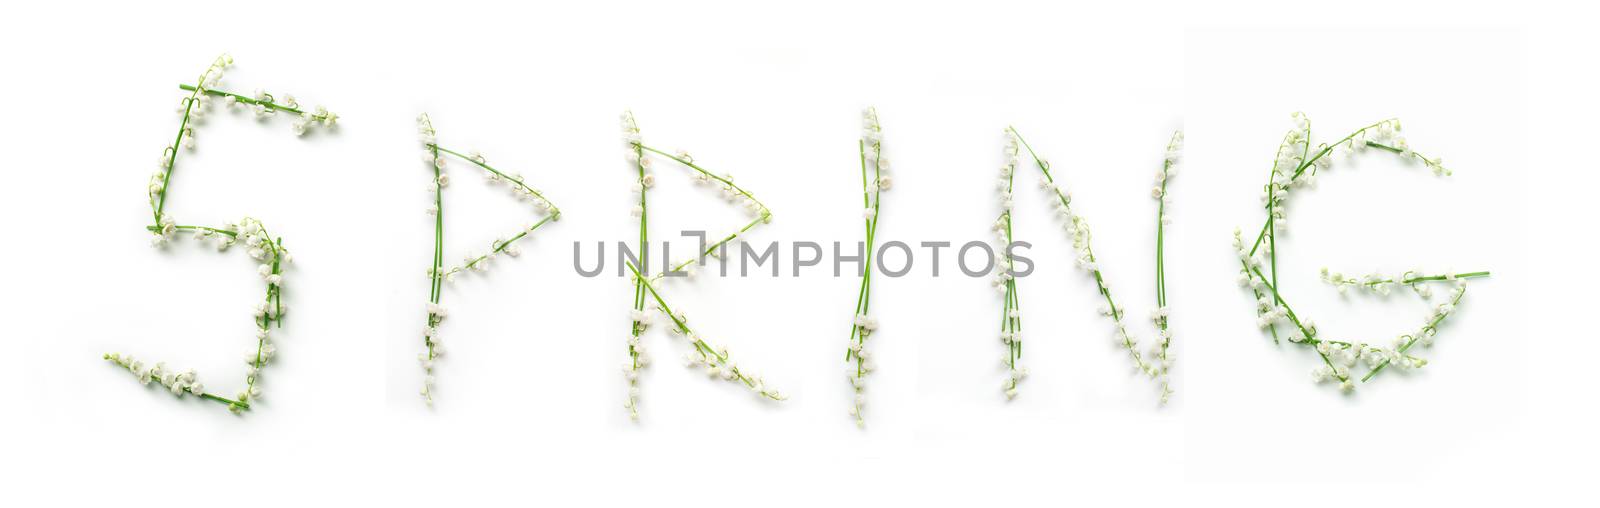 word Spring with lily flowers on white background by timonko